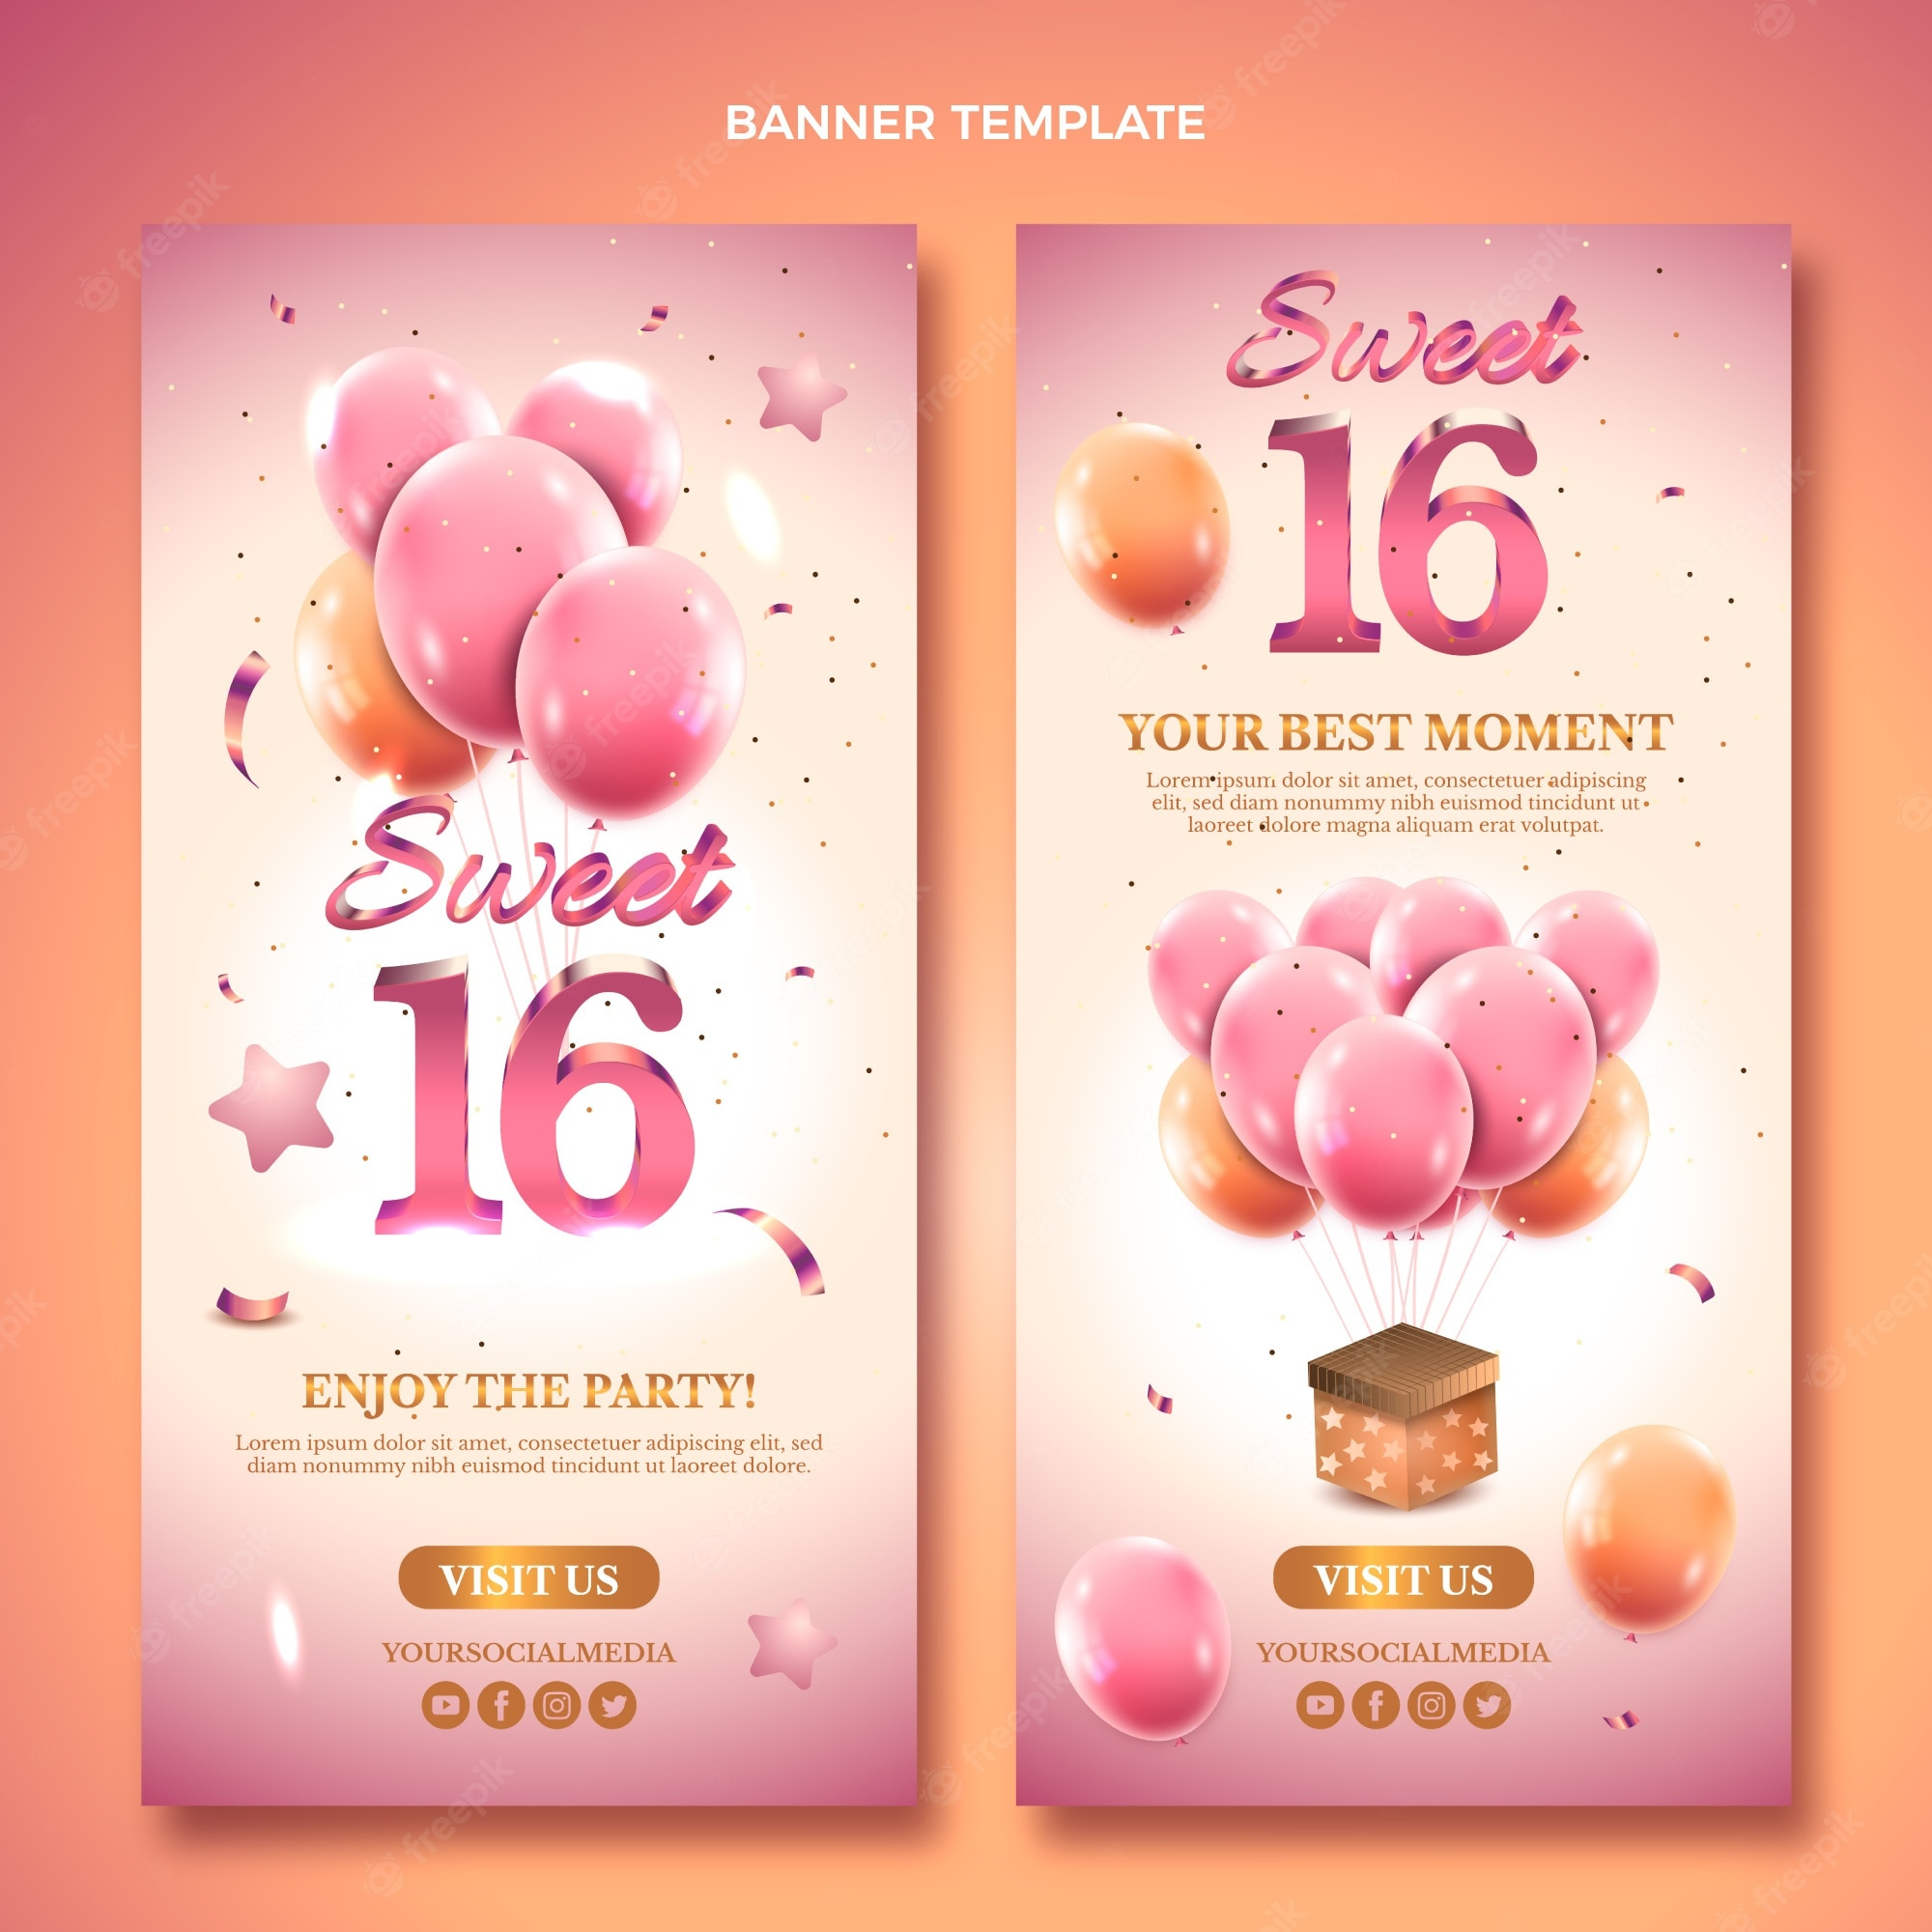 Sweet Sixteen Birthday Images  Free Vectors, Stock Photos & PSD Within Sweet 16 Banner Template